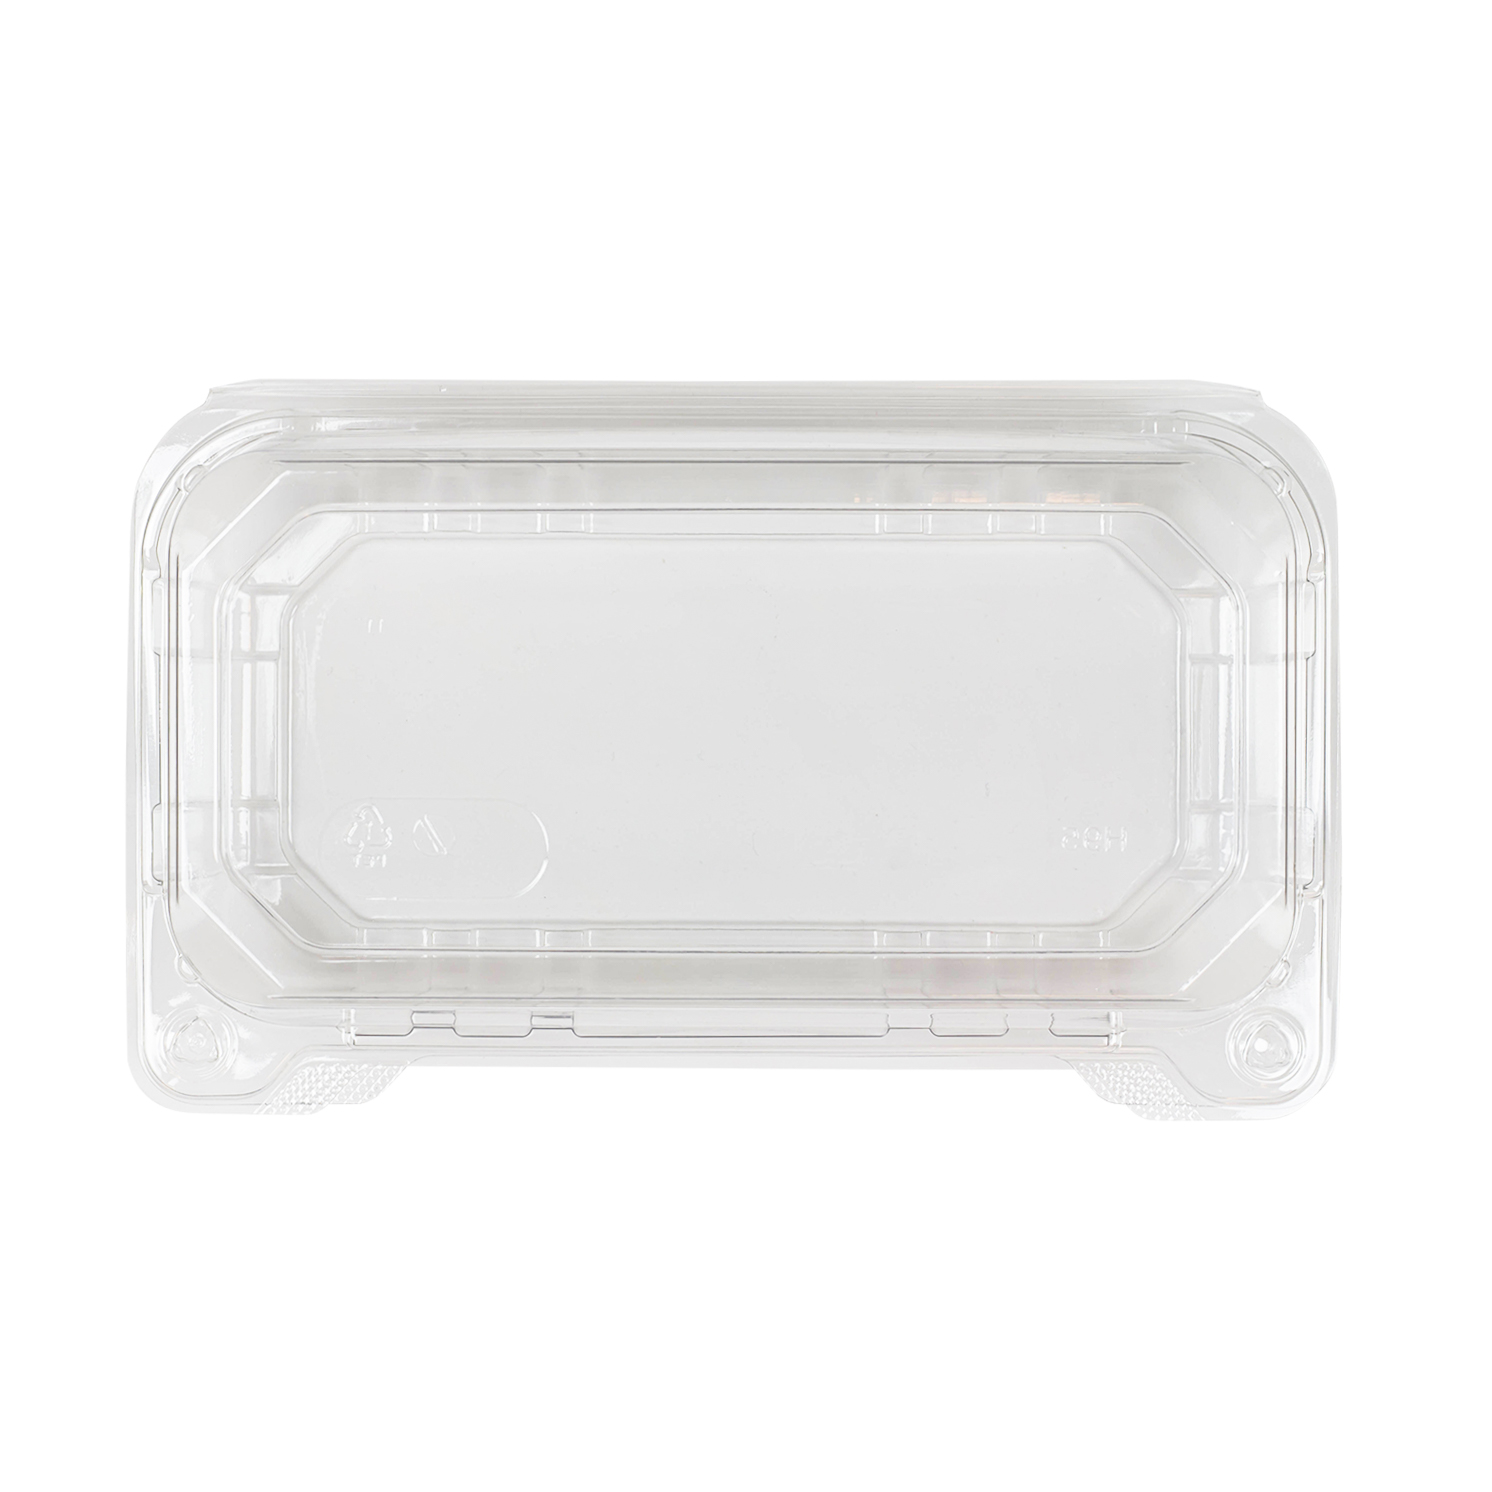 Medium Biodegradable Takeout Boxes - Karat 9''x6'' Hinged Containers